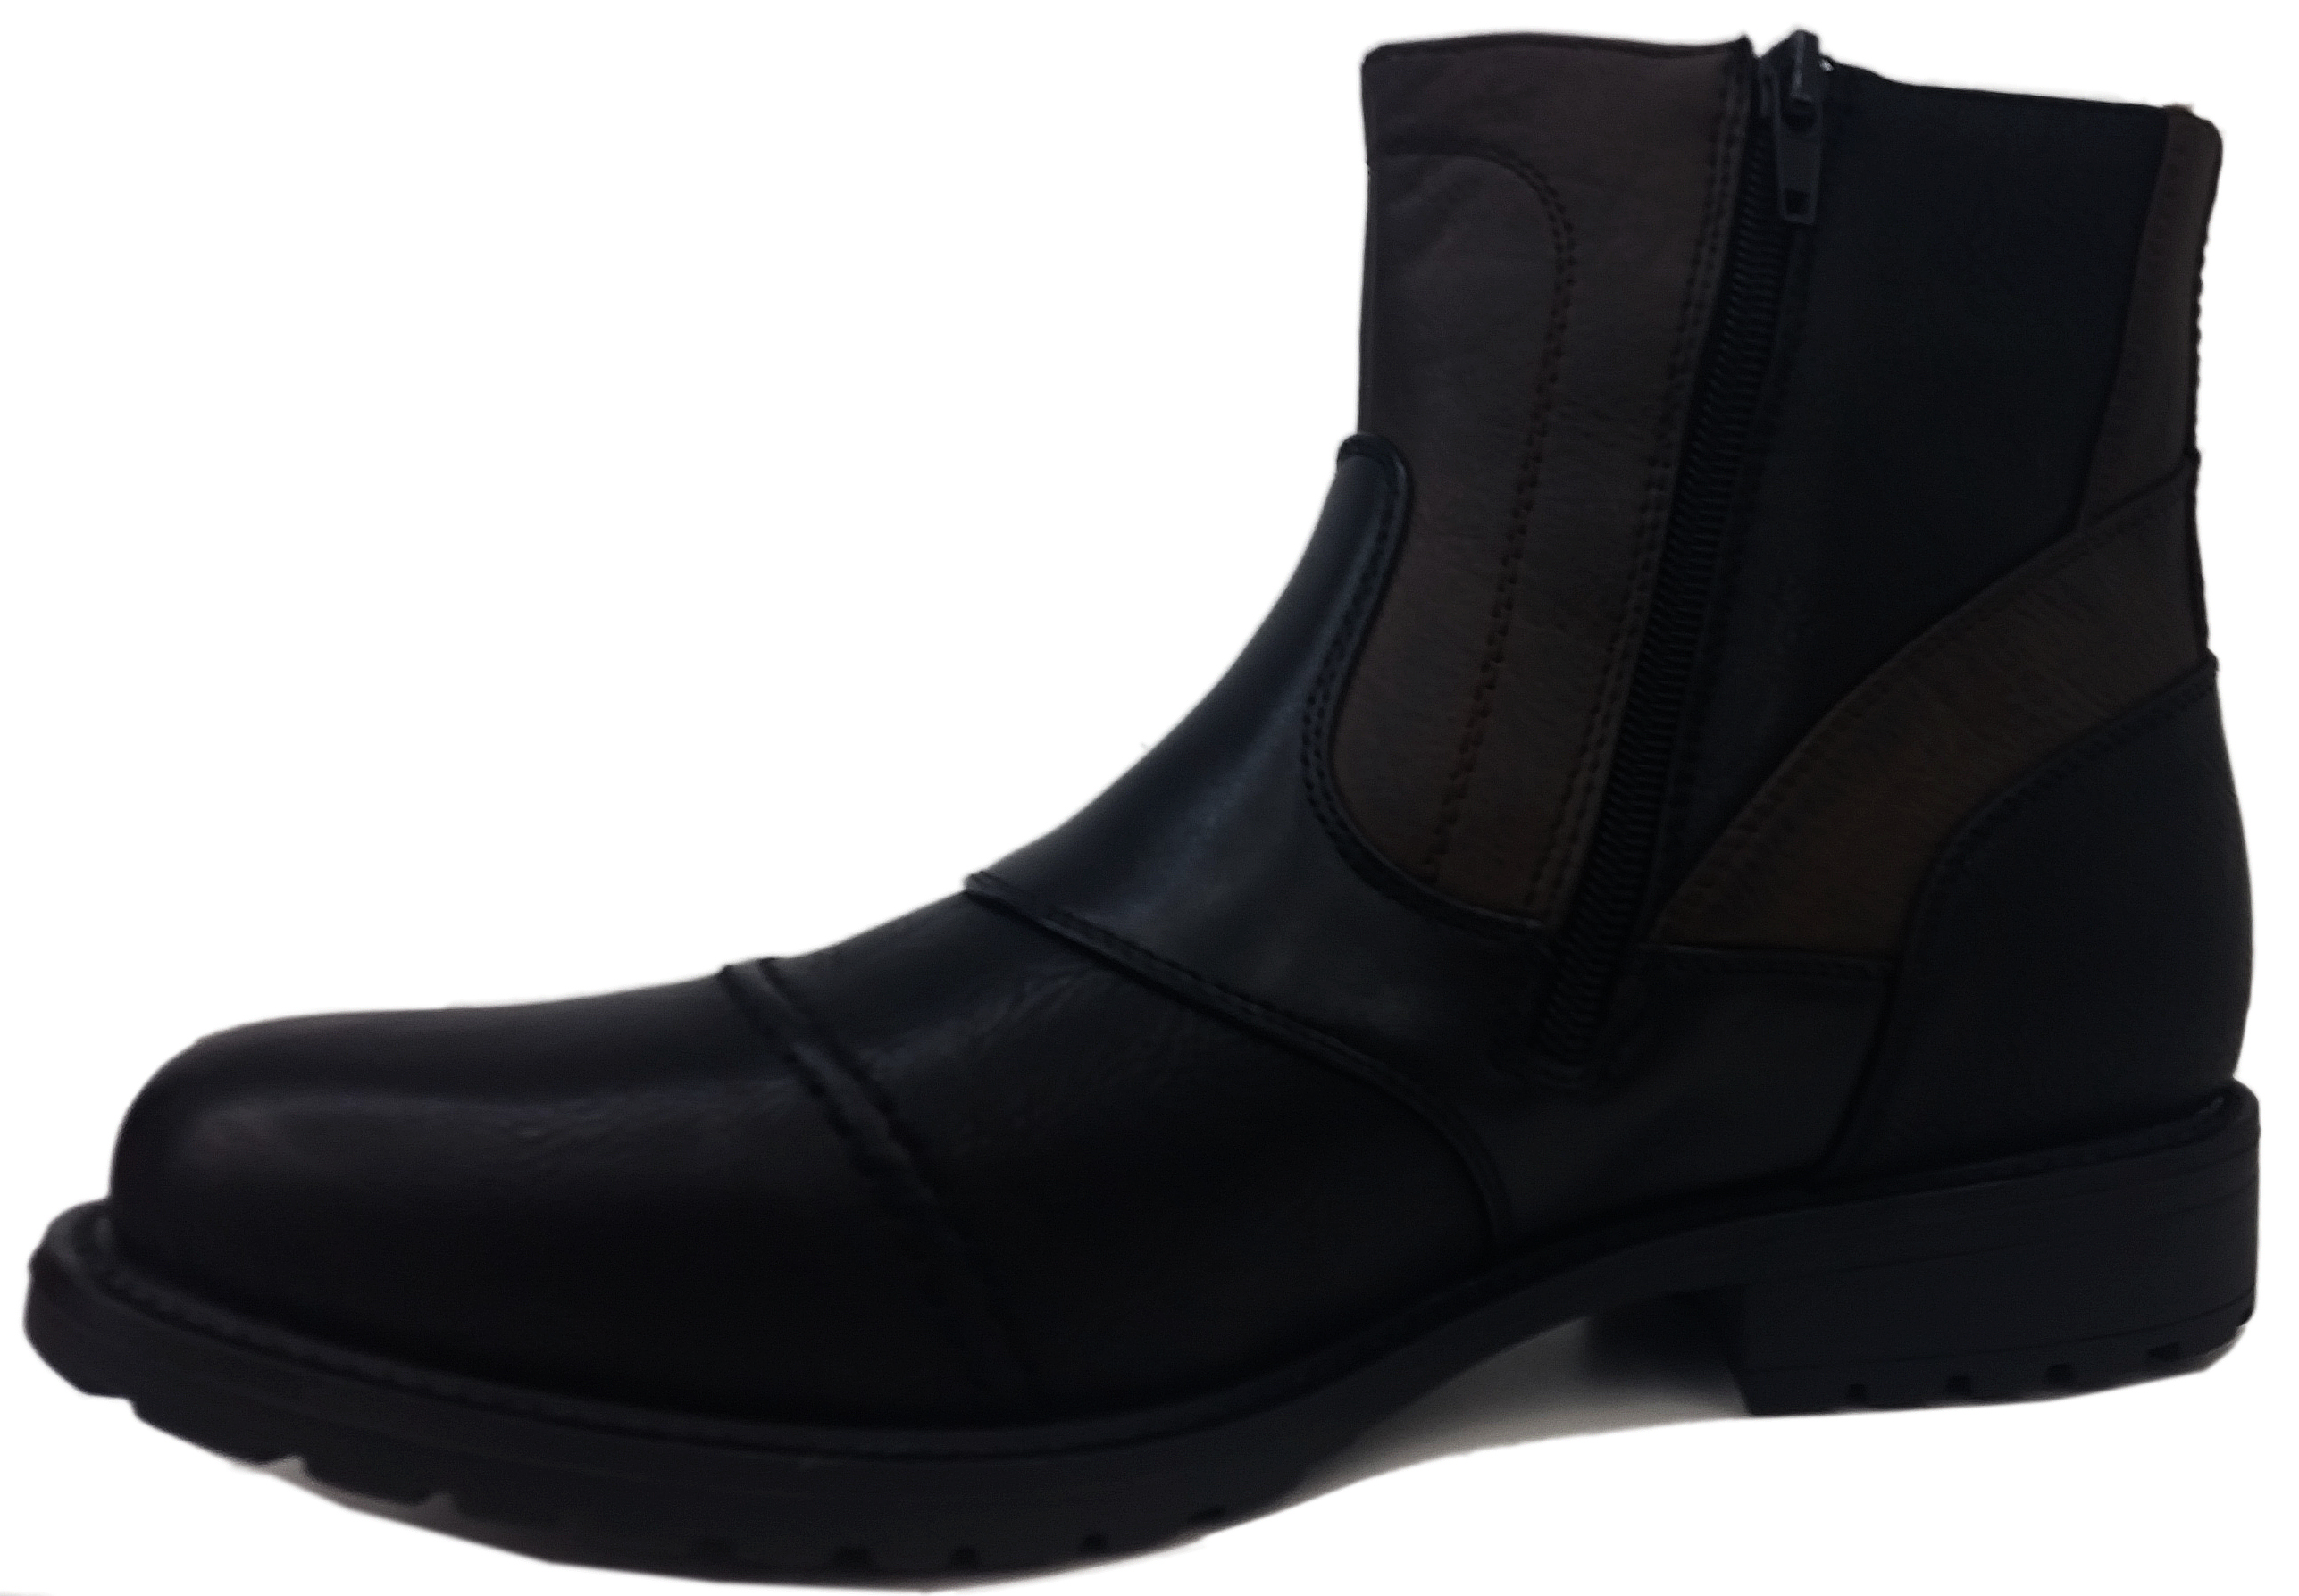 Boots - Men's Jonathan D Boots | 3 Colours was sold for R599.00 on 10 ...